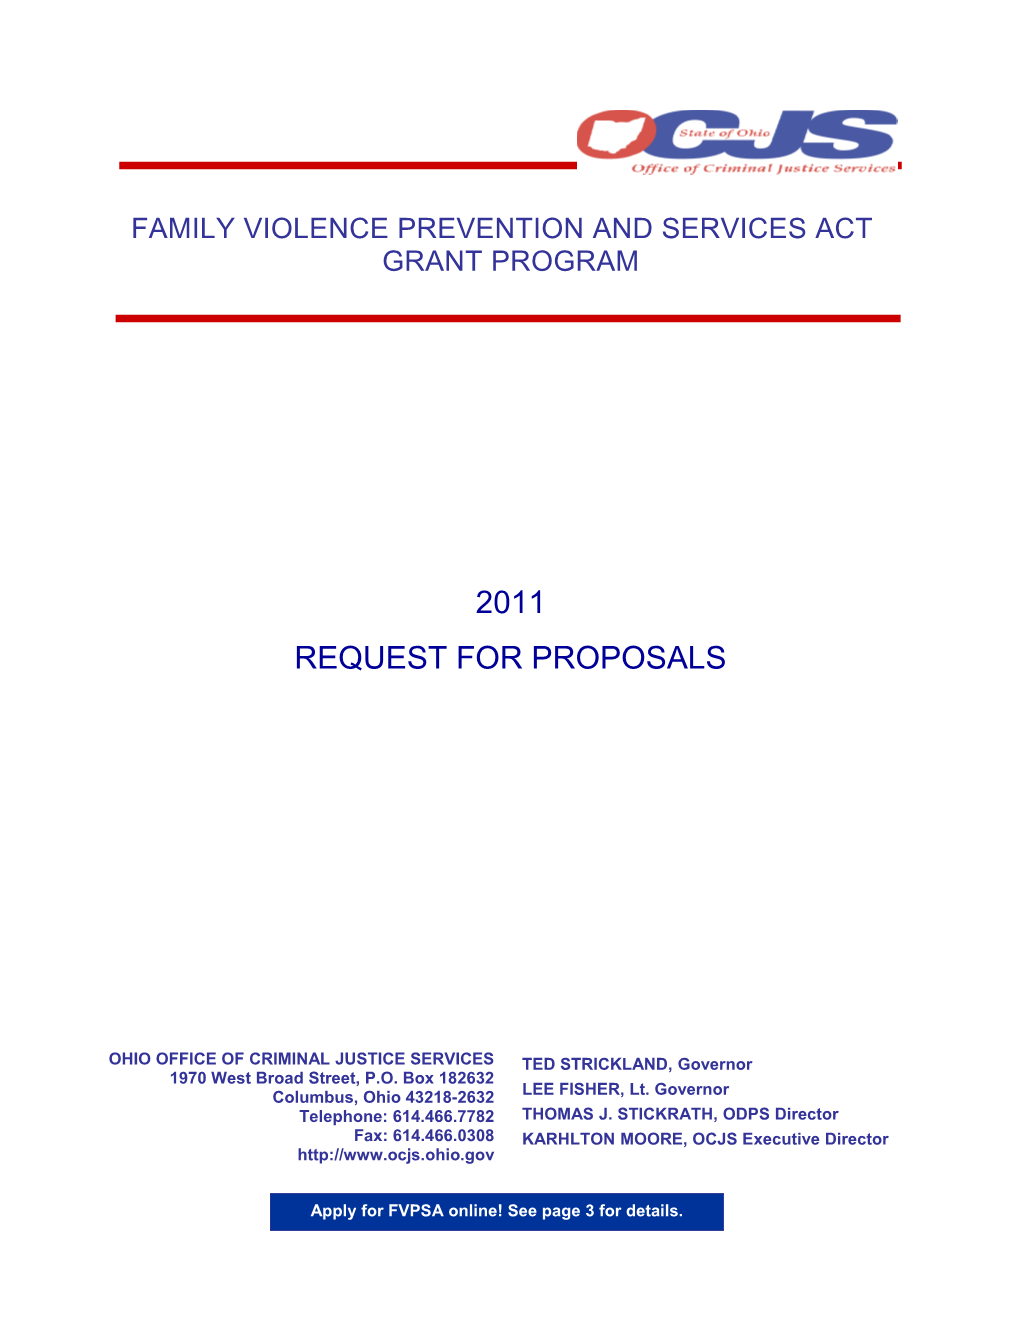 Family Violence Prevention Andservices Act